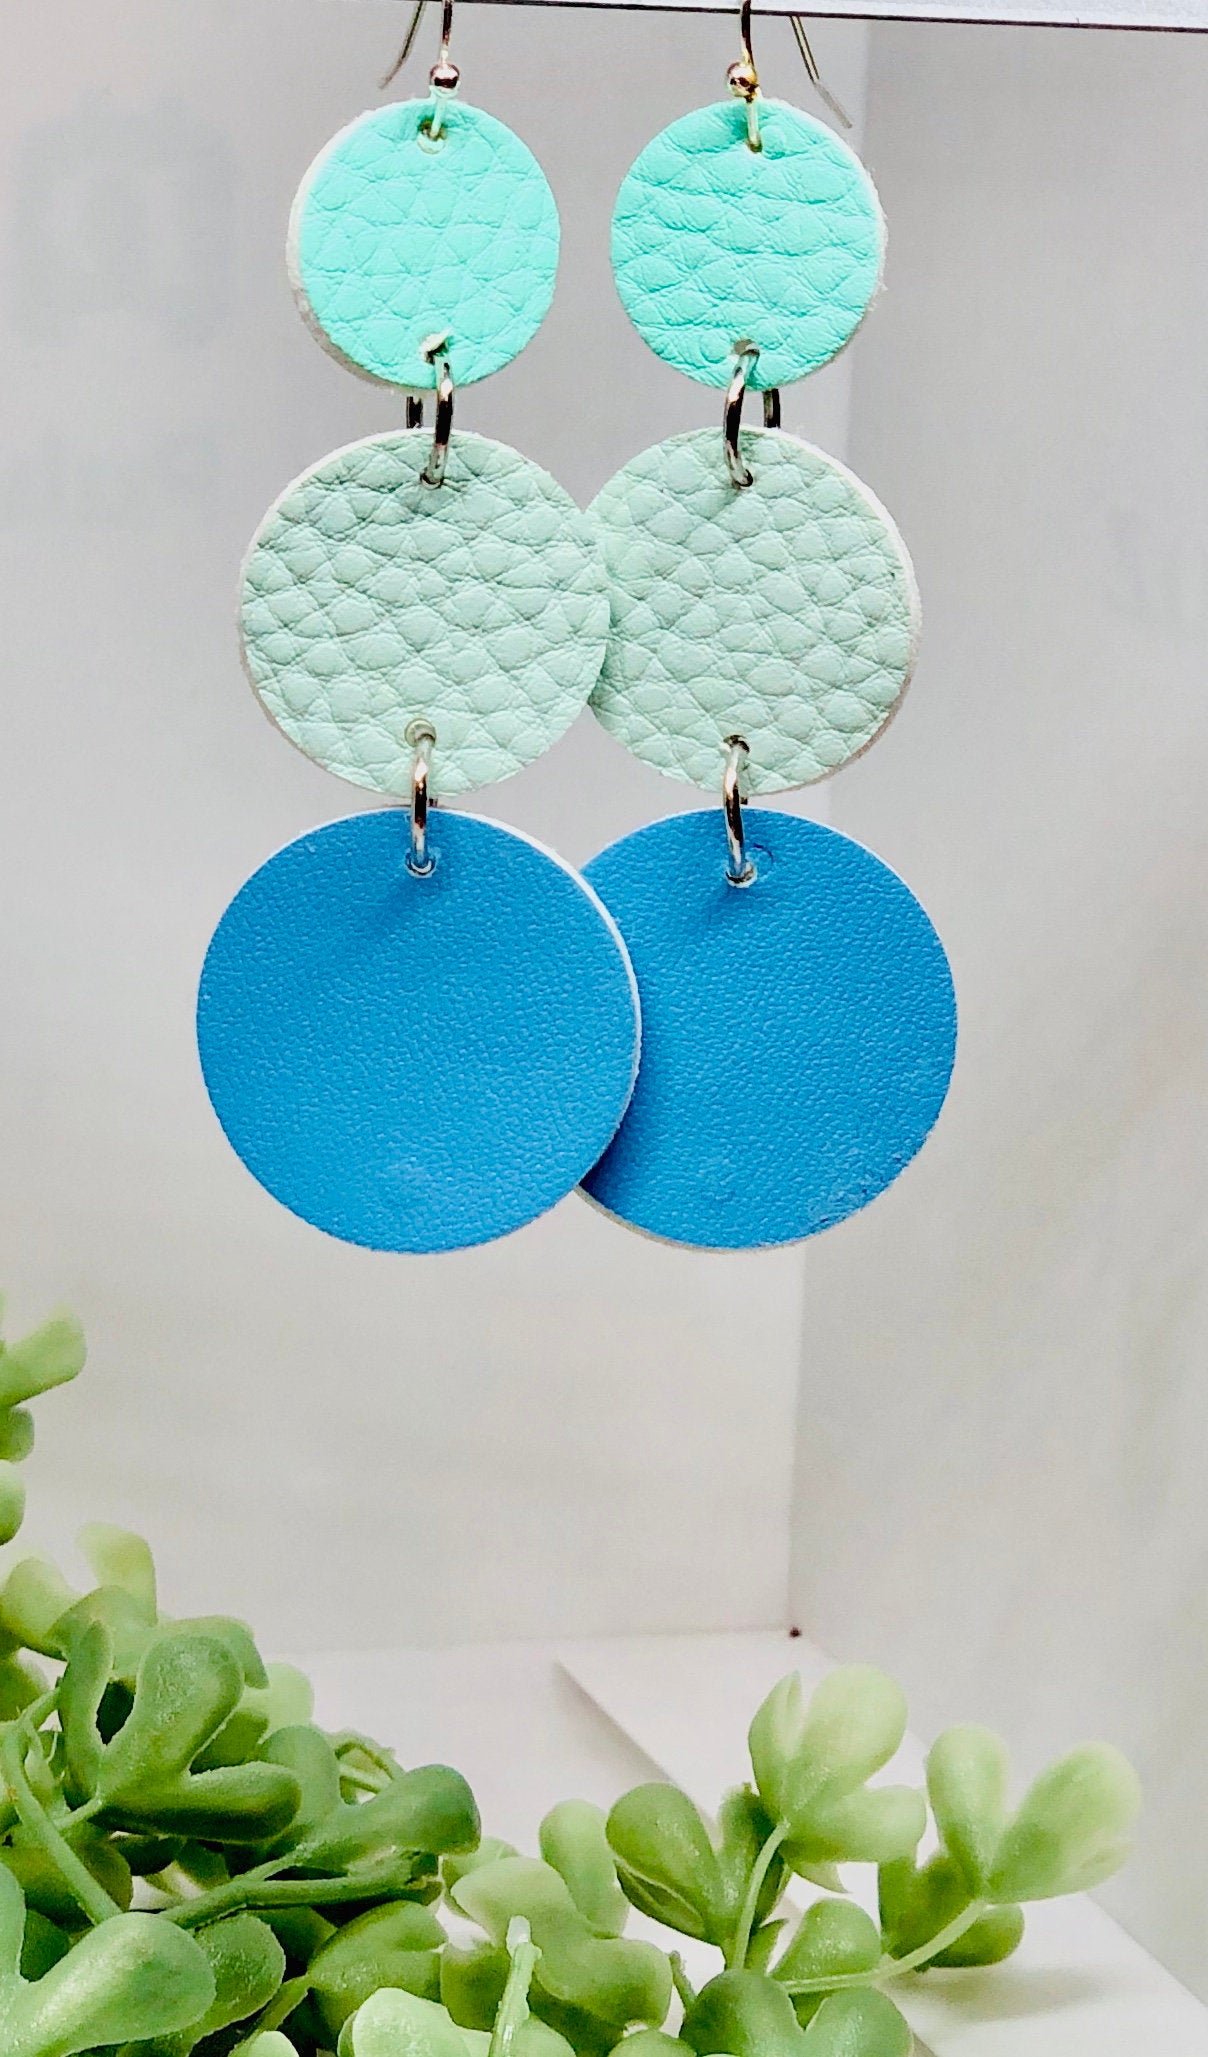 Cascading Circles Faux Leather Dangle Earrings, Teal Green Circle, Mint Green Circle, Blue Circle, Circle Dangles, Lightweight, Double-sided